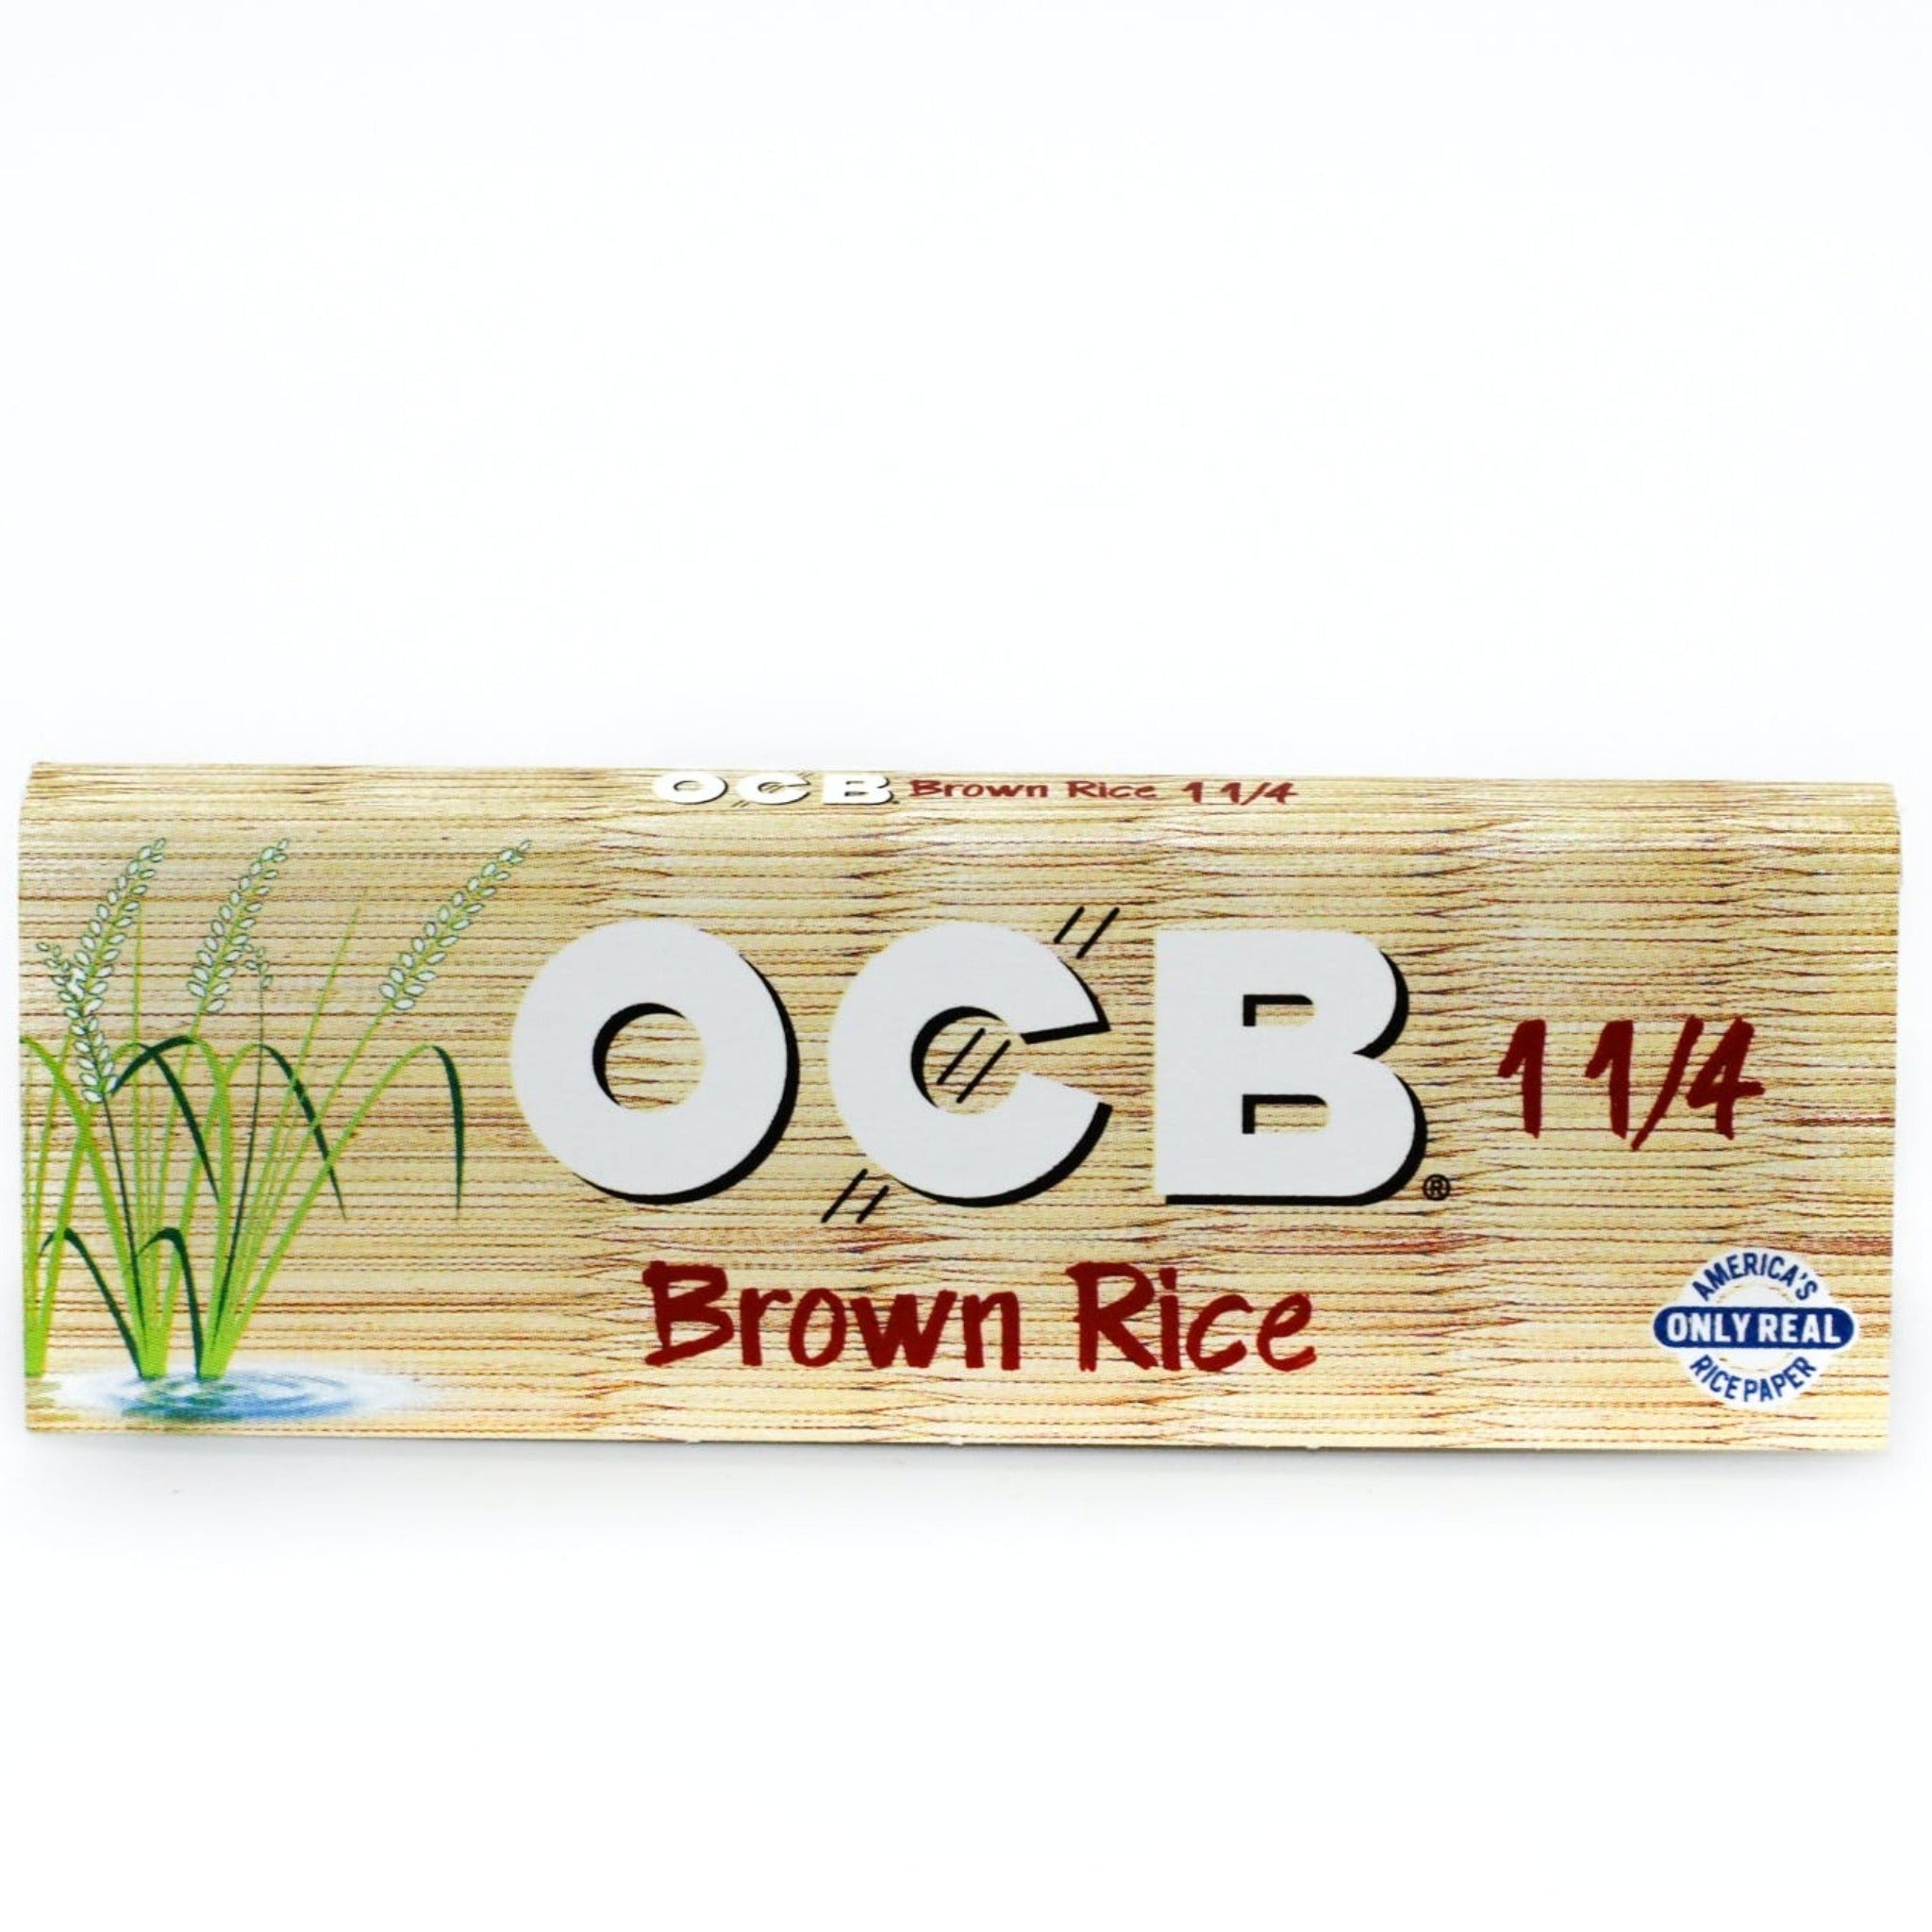 OCB Original Roling Papers + Tips Rolling Papers OCB Brown Rice 1 1/4 